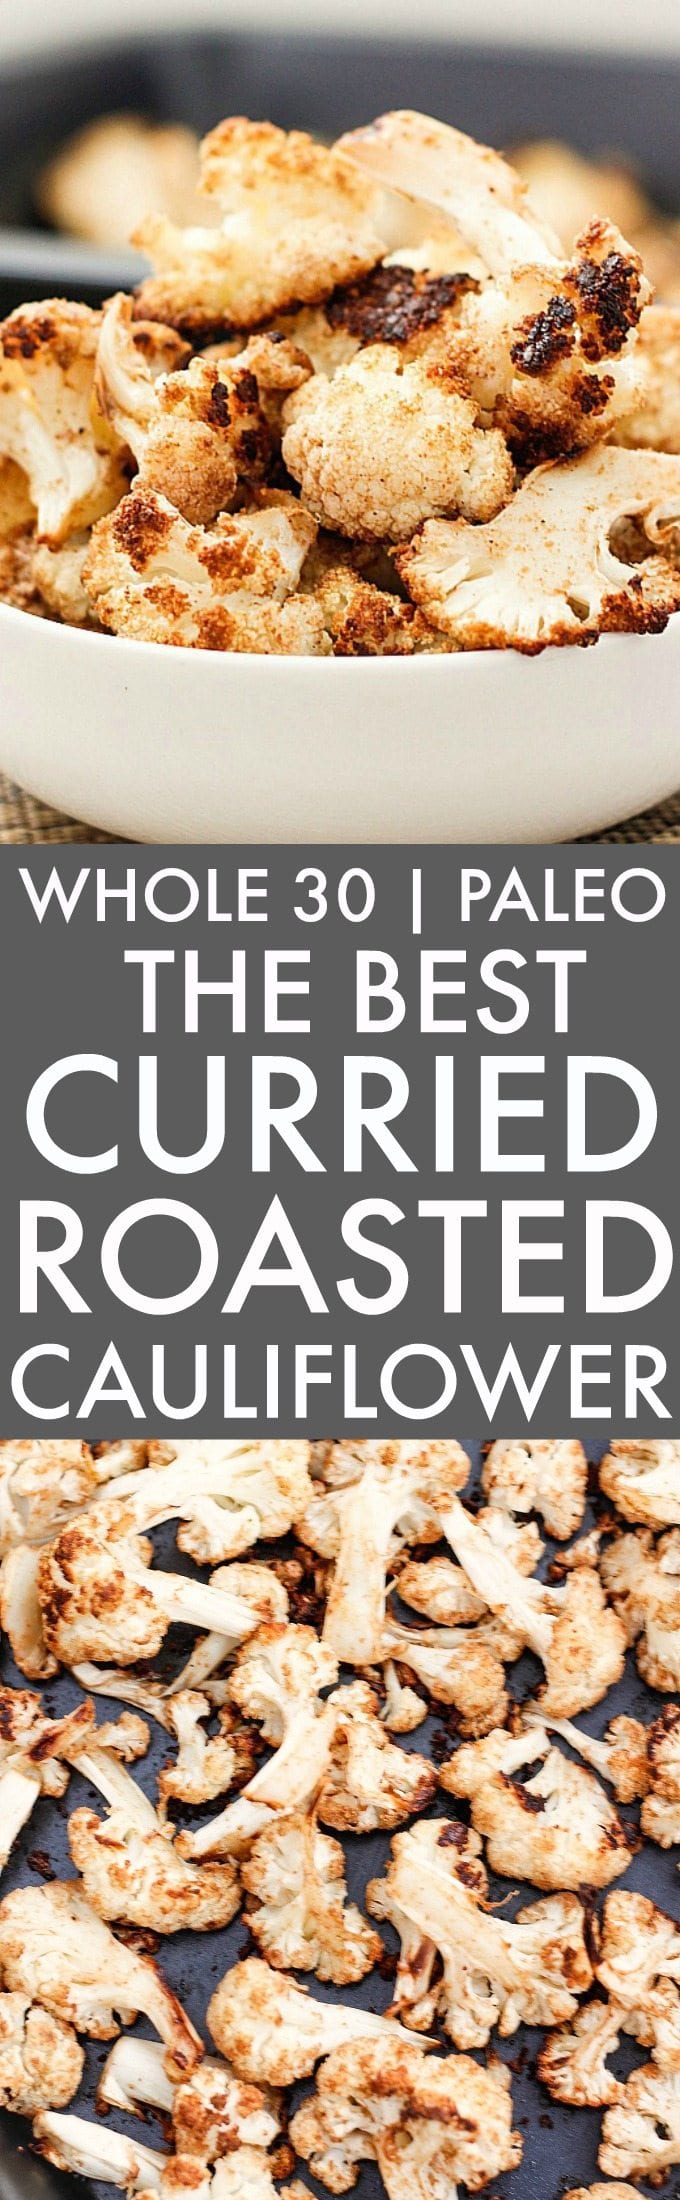 The BEST Curried Roasted Cauliflower (Whole 30, Paleo, V, GF)- Whole30 friendly vegetable side dish, main, dinner or even snack- SO addictively quick, easy and HEALTHY! {whole 30, paleo, vegan, gluten free recipe}- thebigmansworld.com